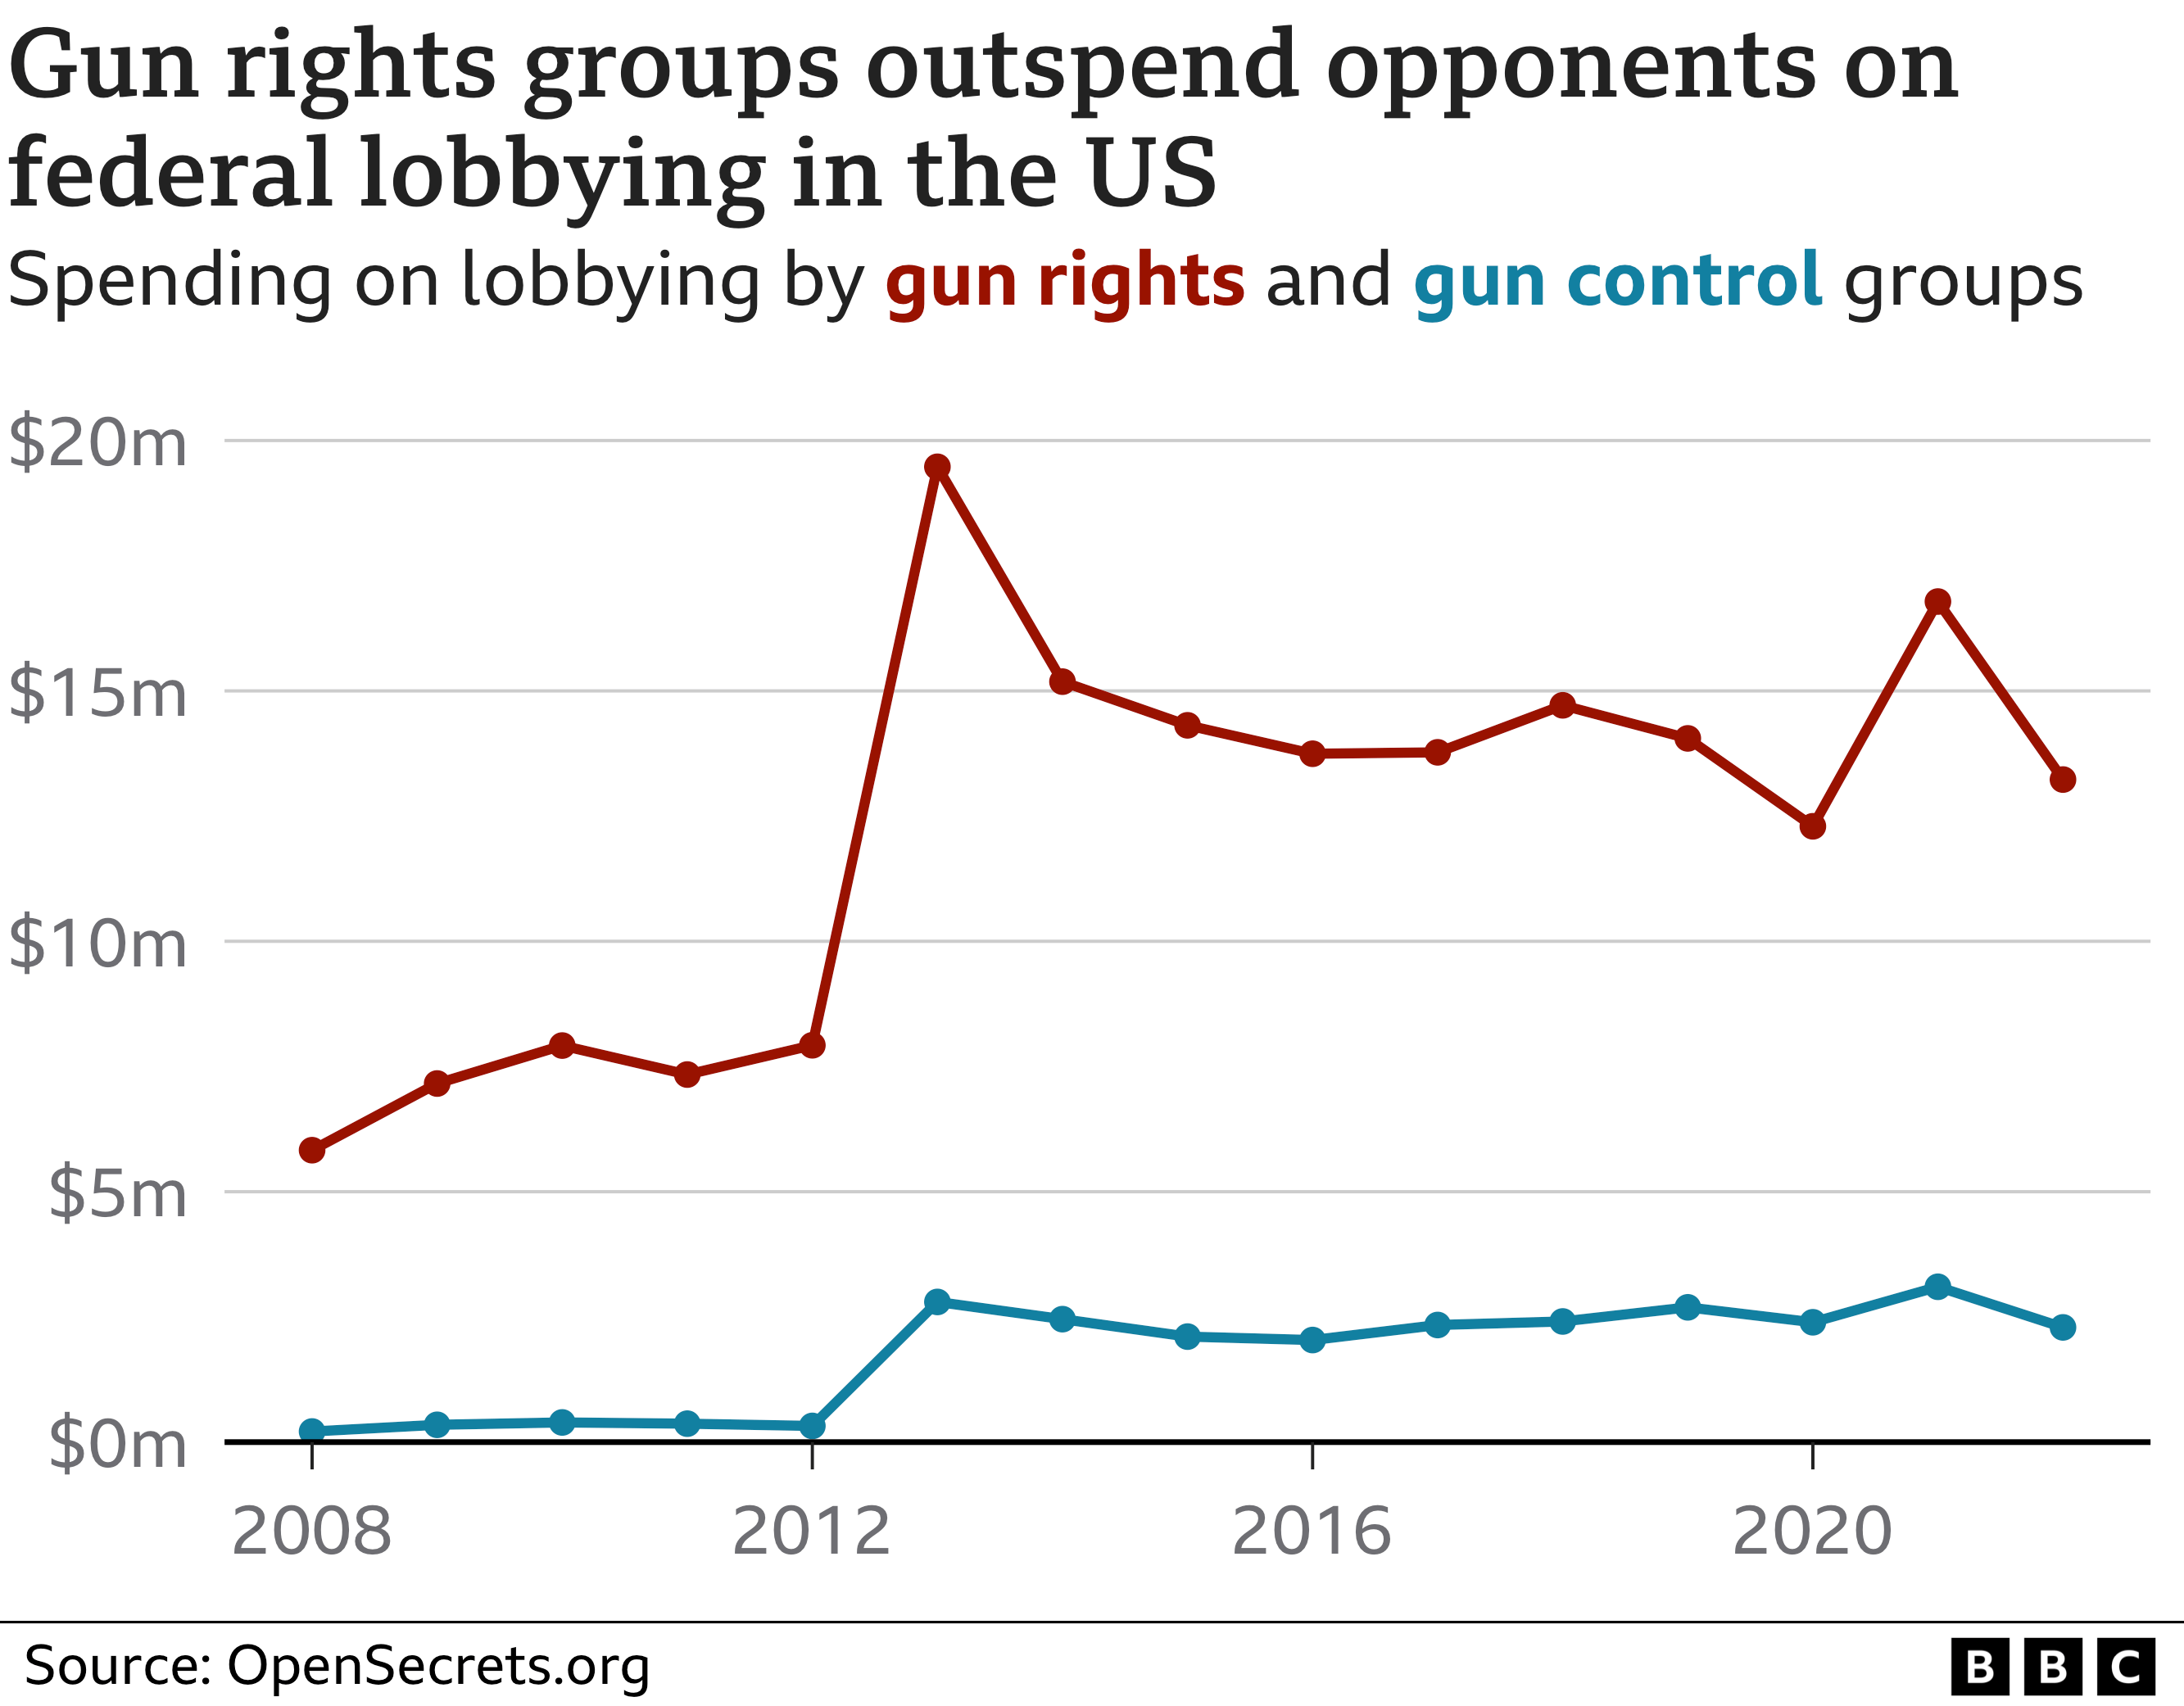 A line chart showing the amount spent per year by gun rights groups and gun control groups on federal lobbying in the US from 2008 to 2022. Gun rights groups have consistently spent more than double what gun control groups have. Gun rights spending peaked in 2013 at just under $20m - gun control groups spent just under $3m in the same year. In 2022, gun rights groups spent $13m, while their opponents spent $2.3m.